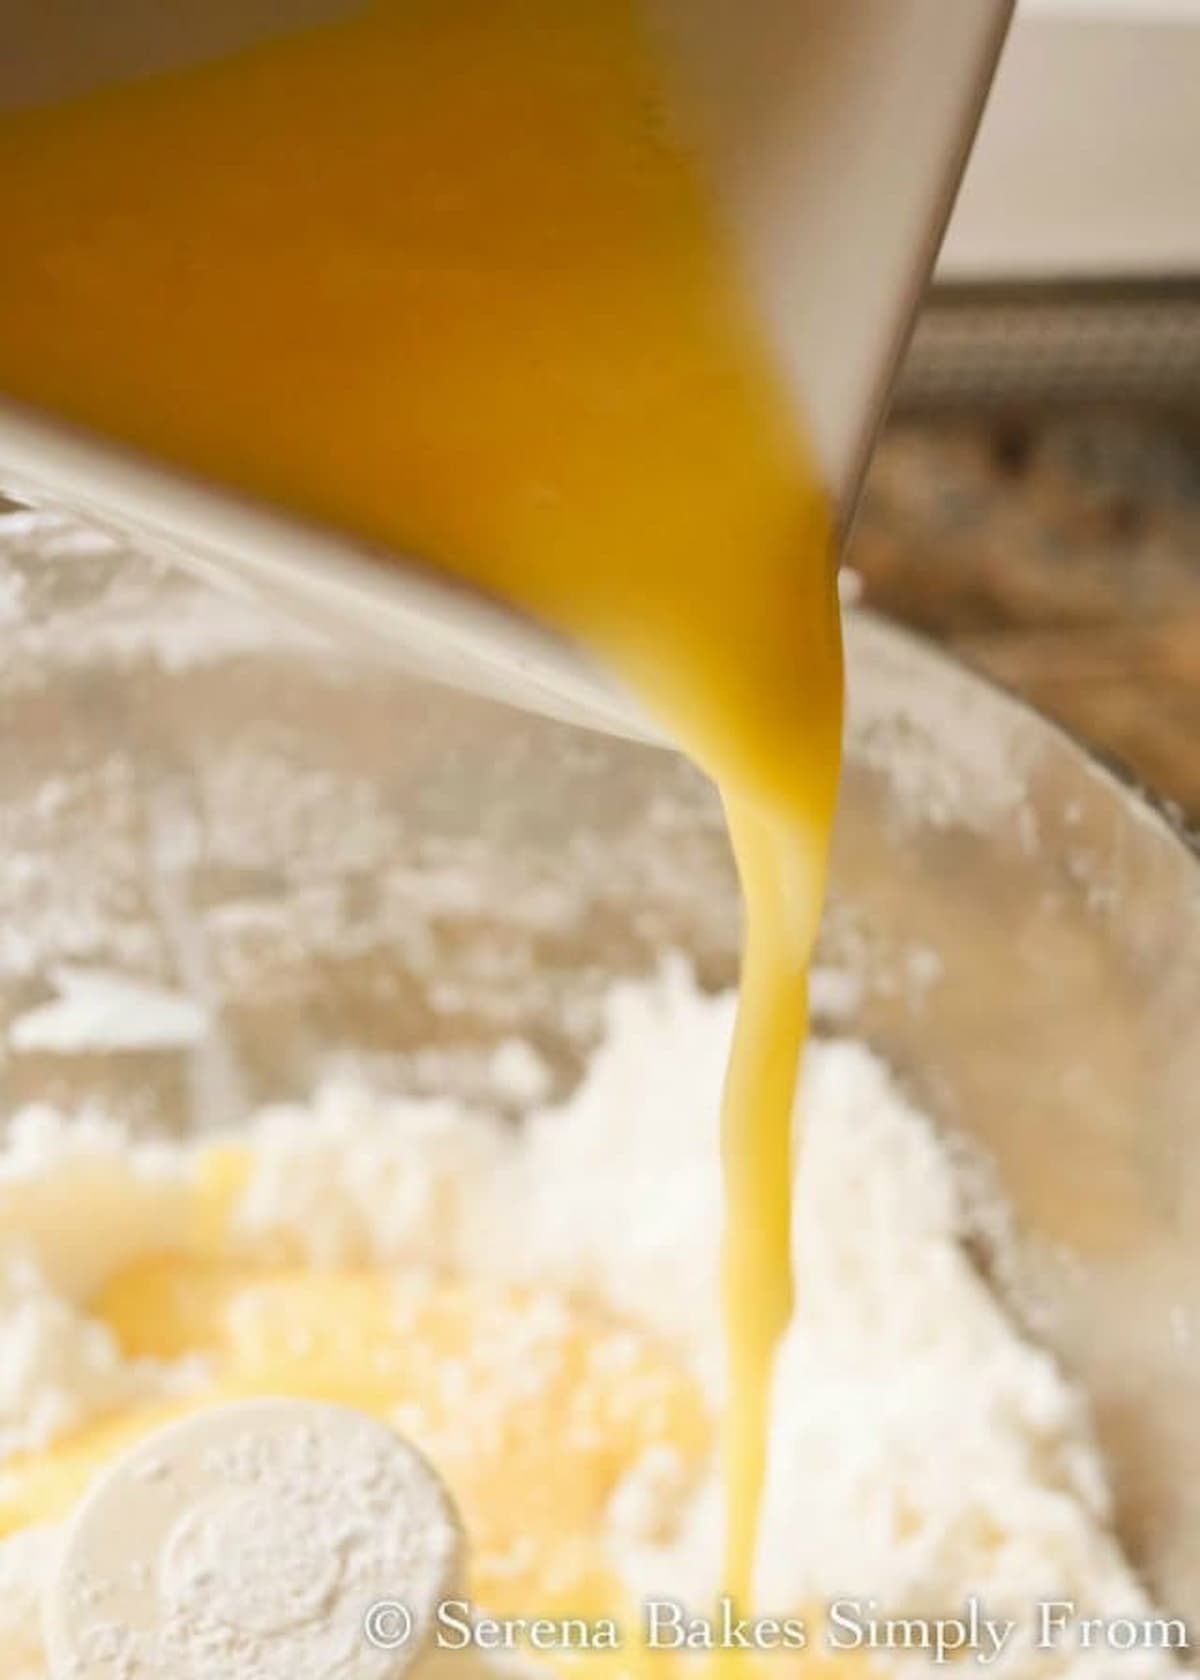 Egg mixture being drizzled into gluten free flour mixture in food processor.